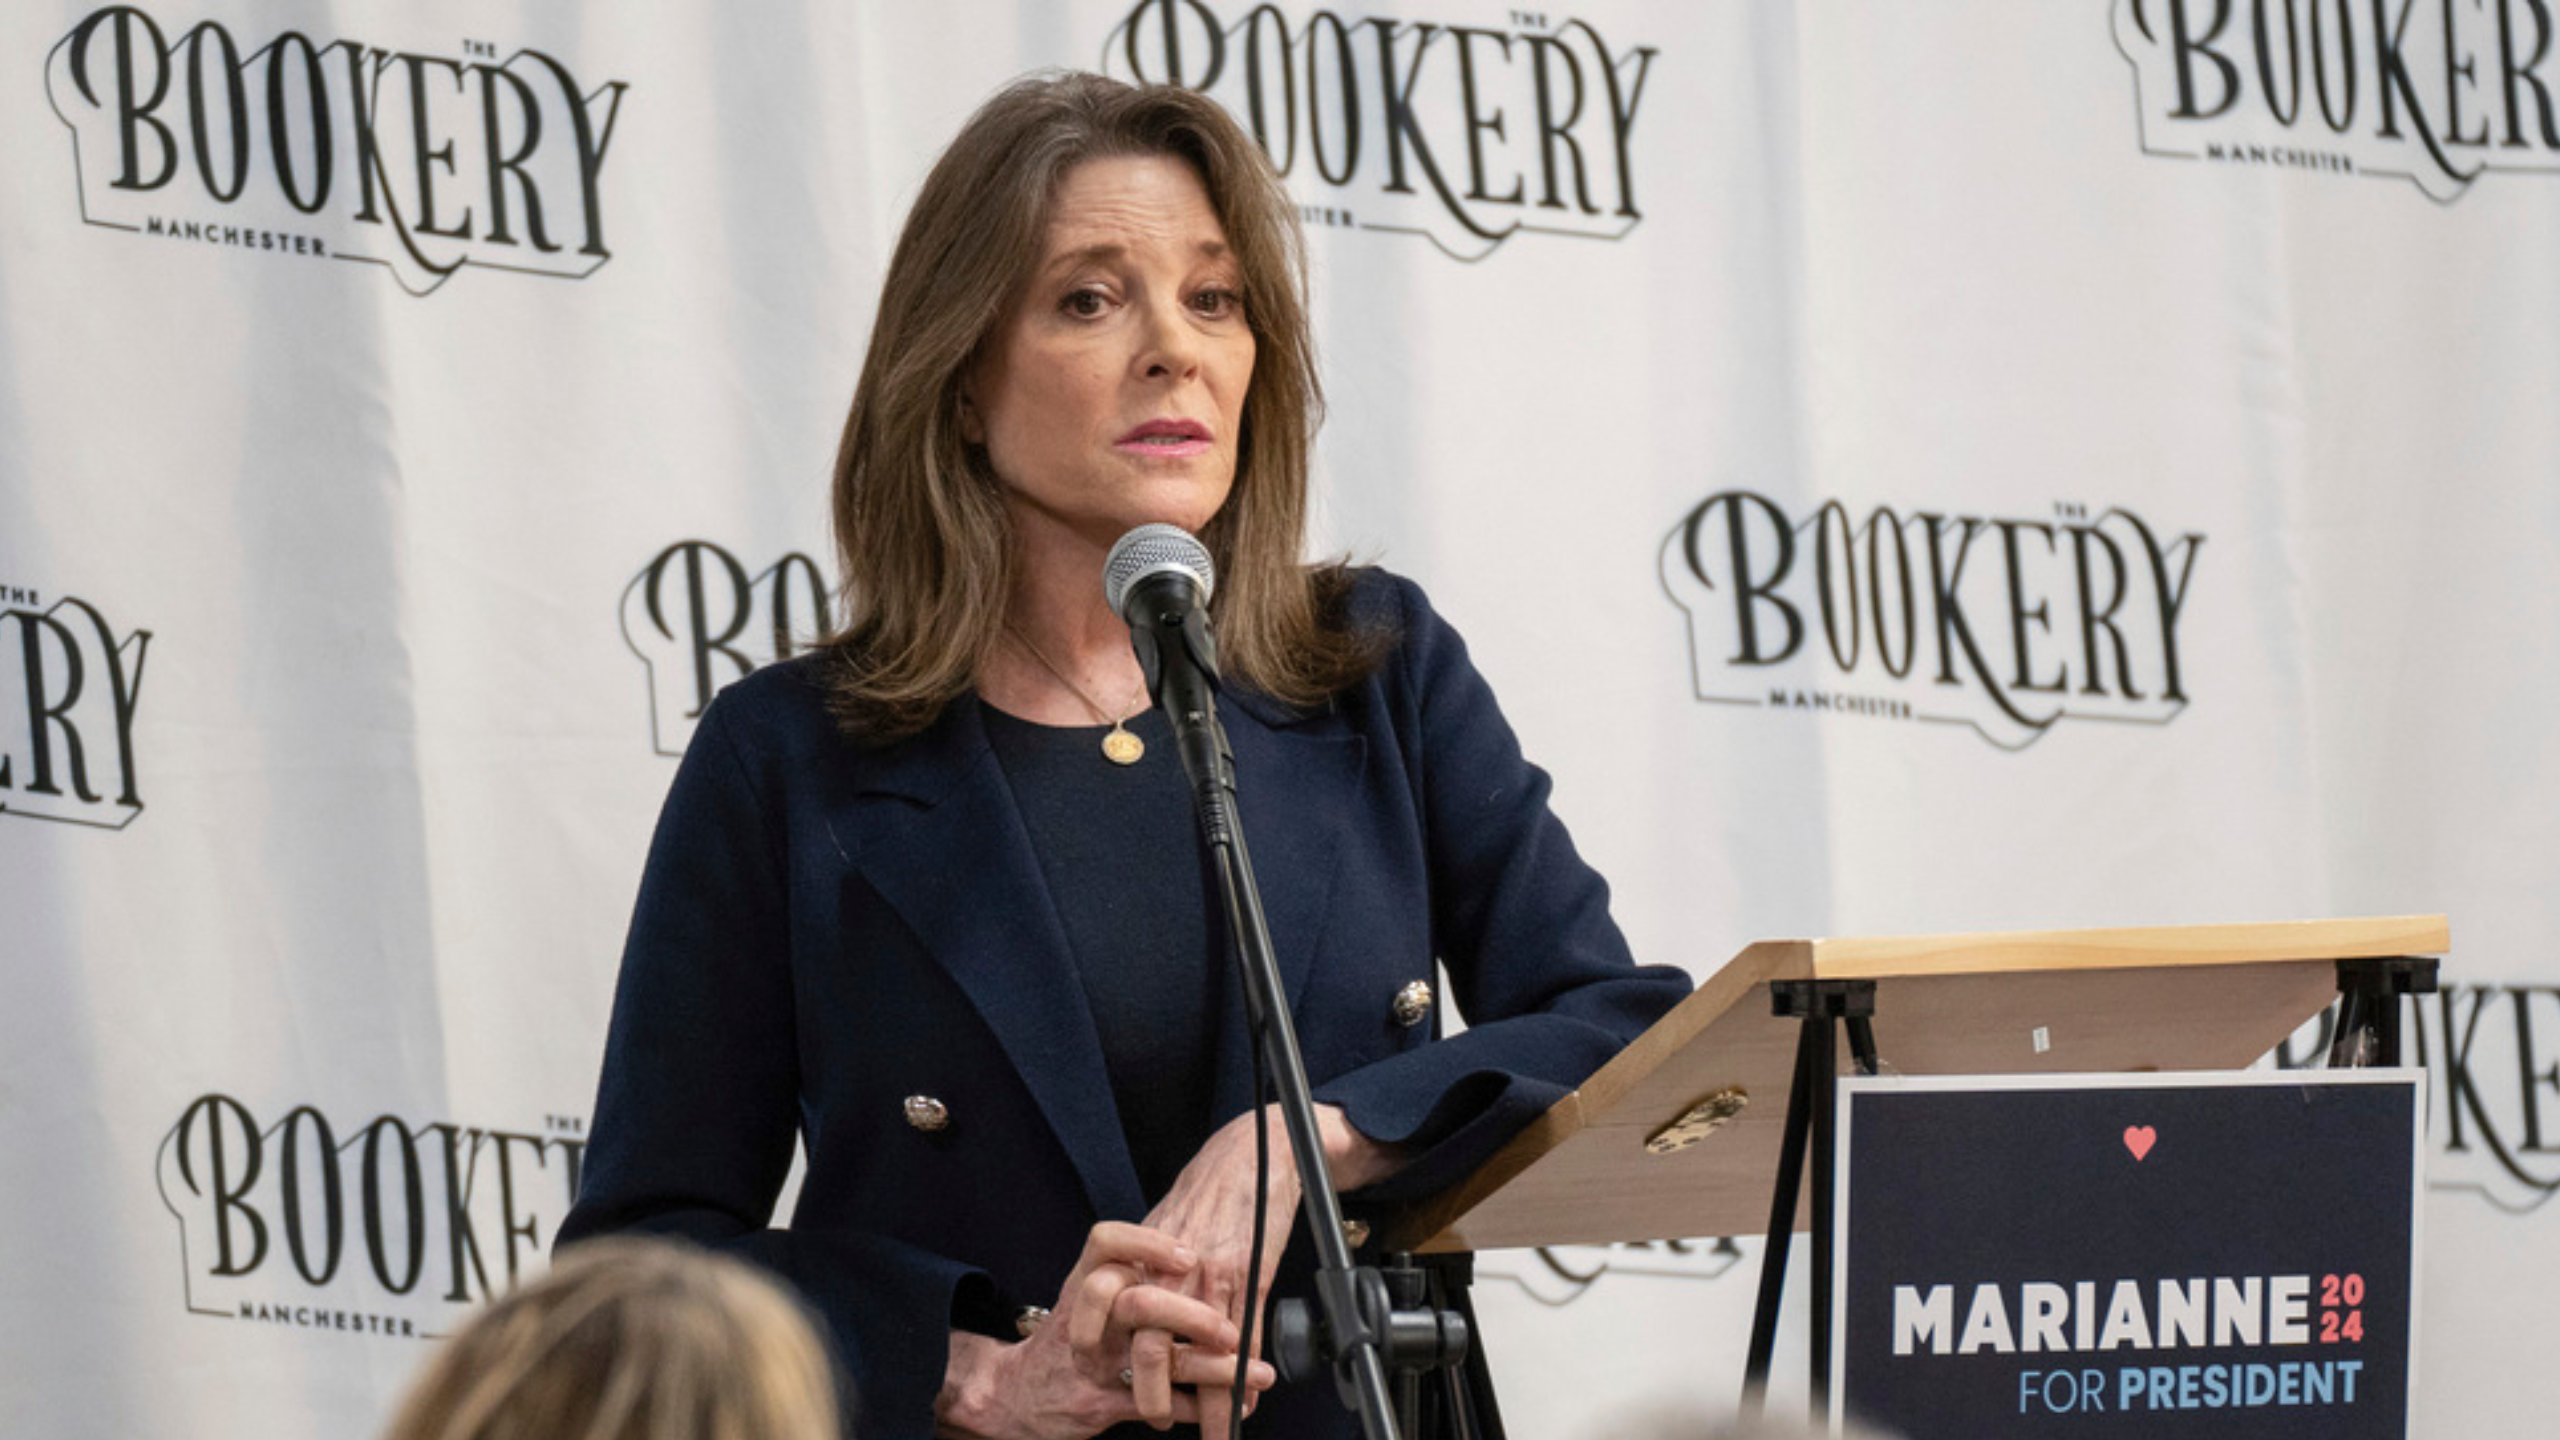 Marianne Williamson Delivers Lengthy Diatribe About Nothing When Questioned Over Report on Abusing Employees (mediaite.com)